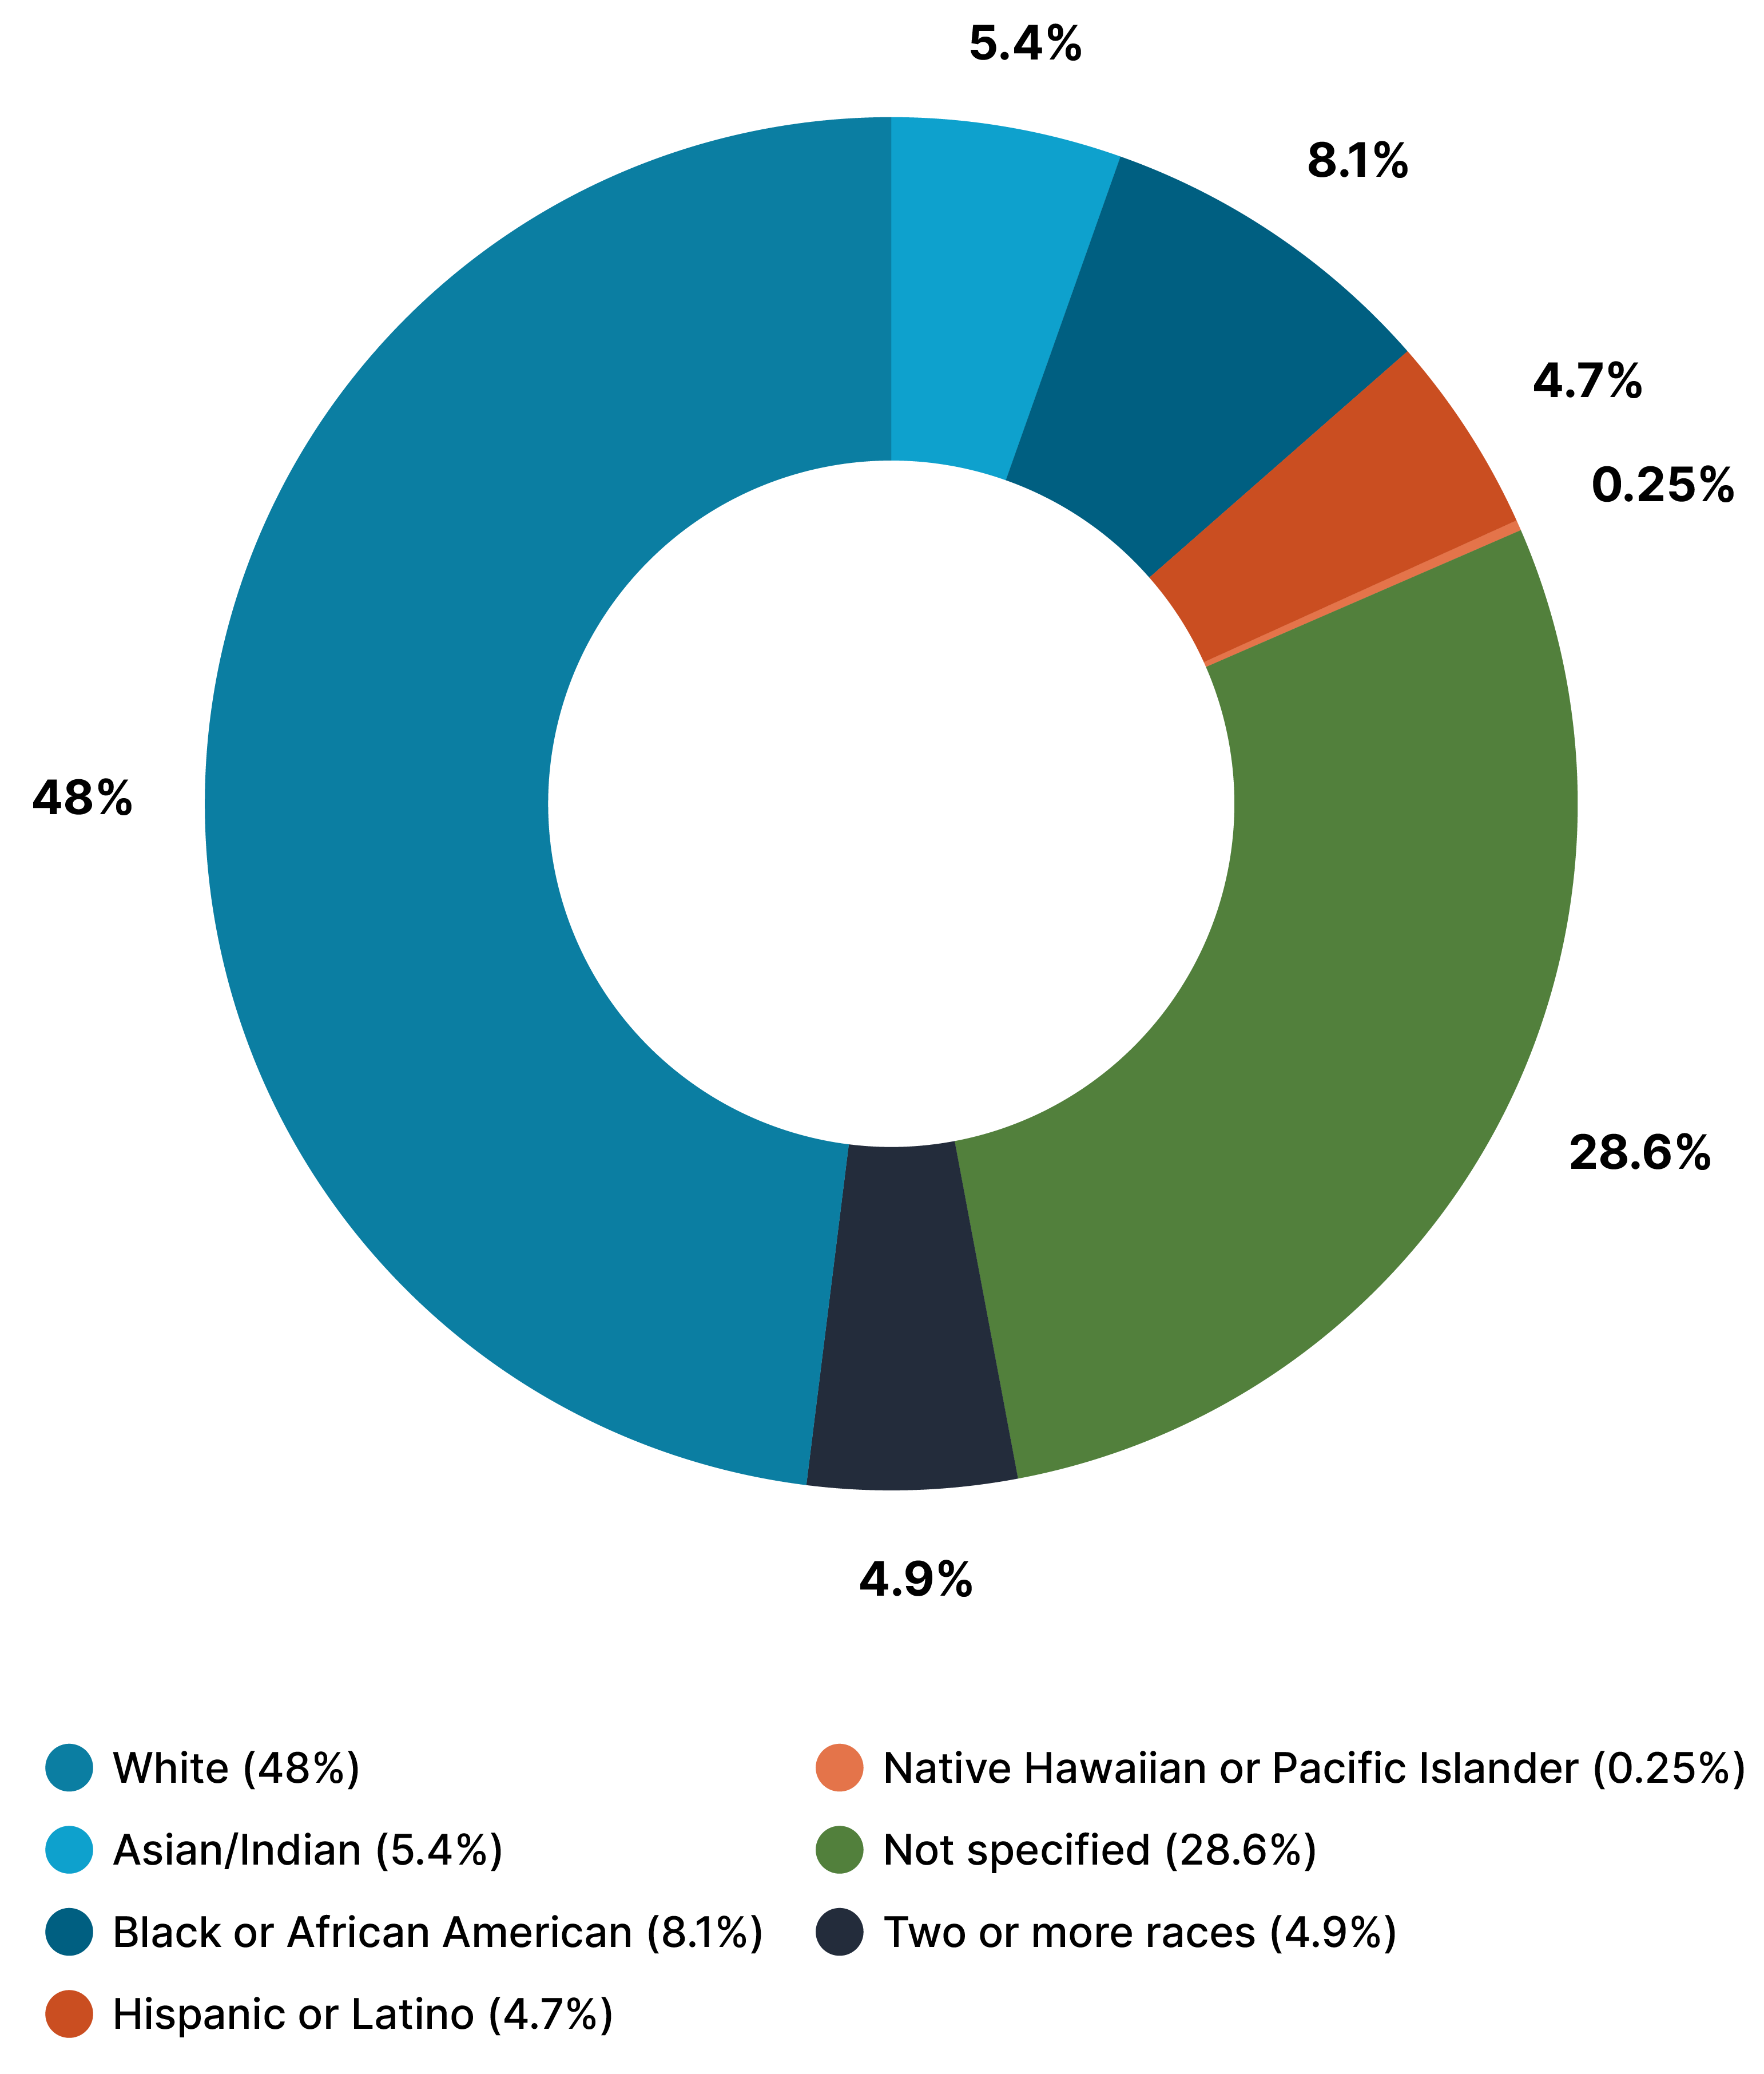 A pie chart depicting ethnicities at Noodle, 48% White, 5.4% Asian/Indian, 8.1% Black or African American, 4.7% Hispanic or Latino, 0.25% Native Hawaiian or Pacific Islander, 28.6% Not Specified, and 4.9% Two or more races.